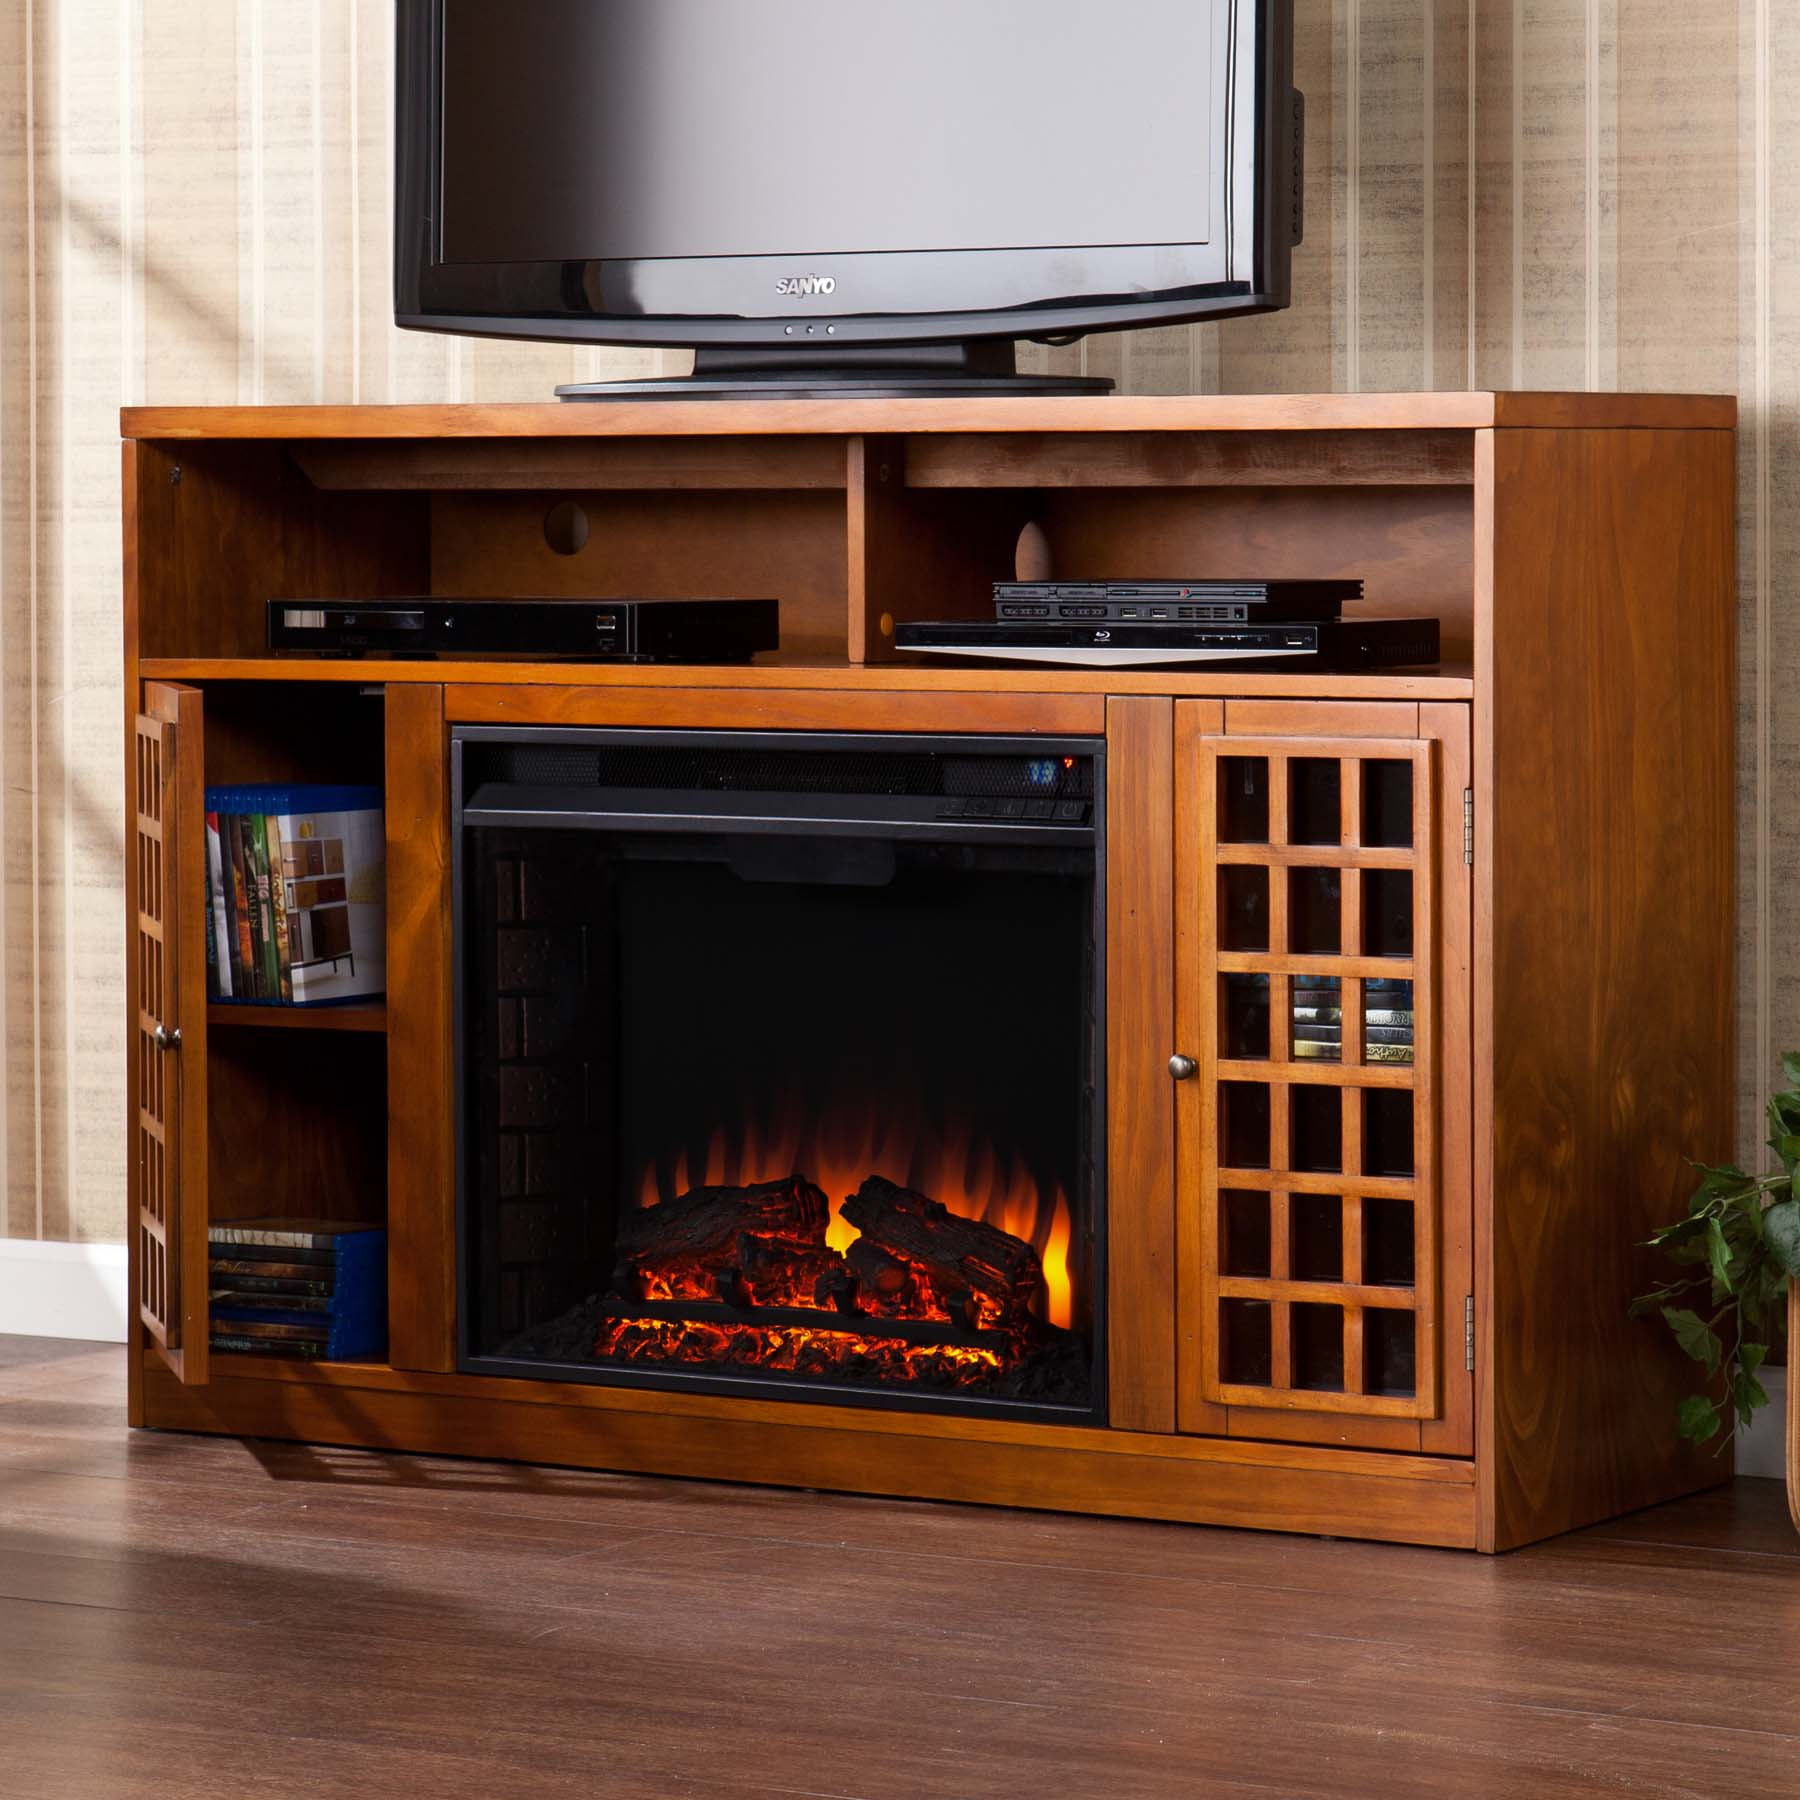 Tv Electric Fireplace
 Tips for Buying an Electric Fireplace